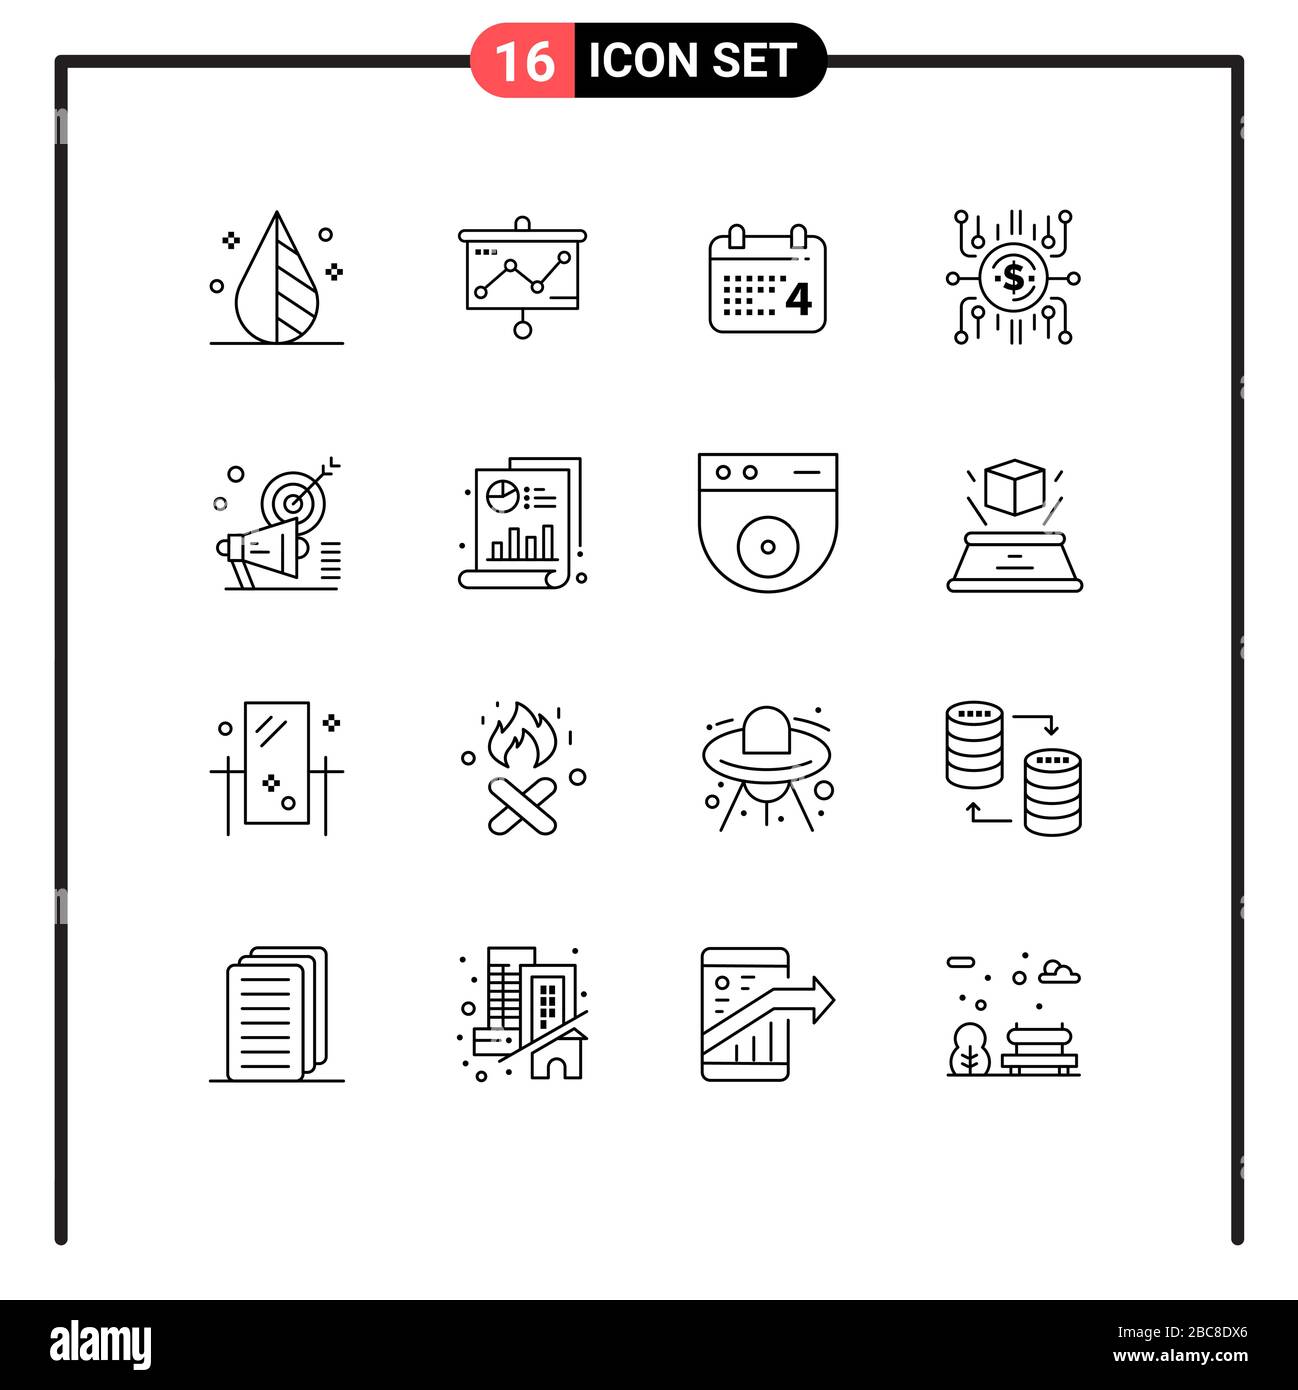 Set of 16 Vector Outlines on Grid for campaign, crowdselling, calender, crowdsale, crowdfund Editable Vector Design Elements Stock Vector